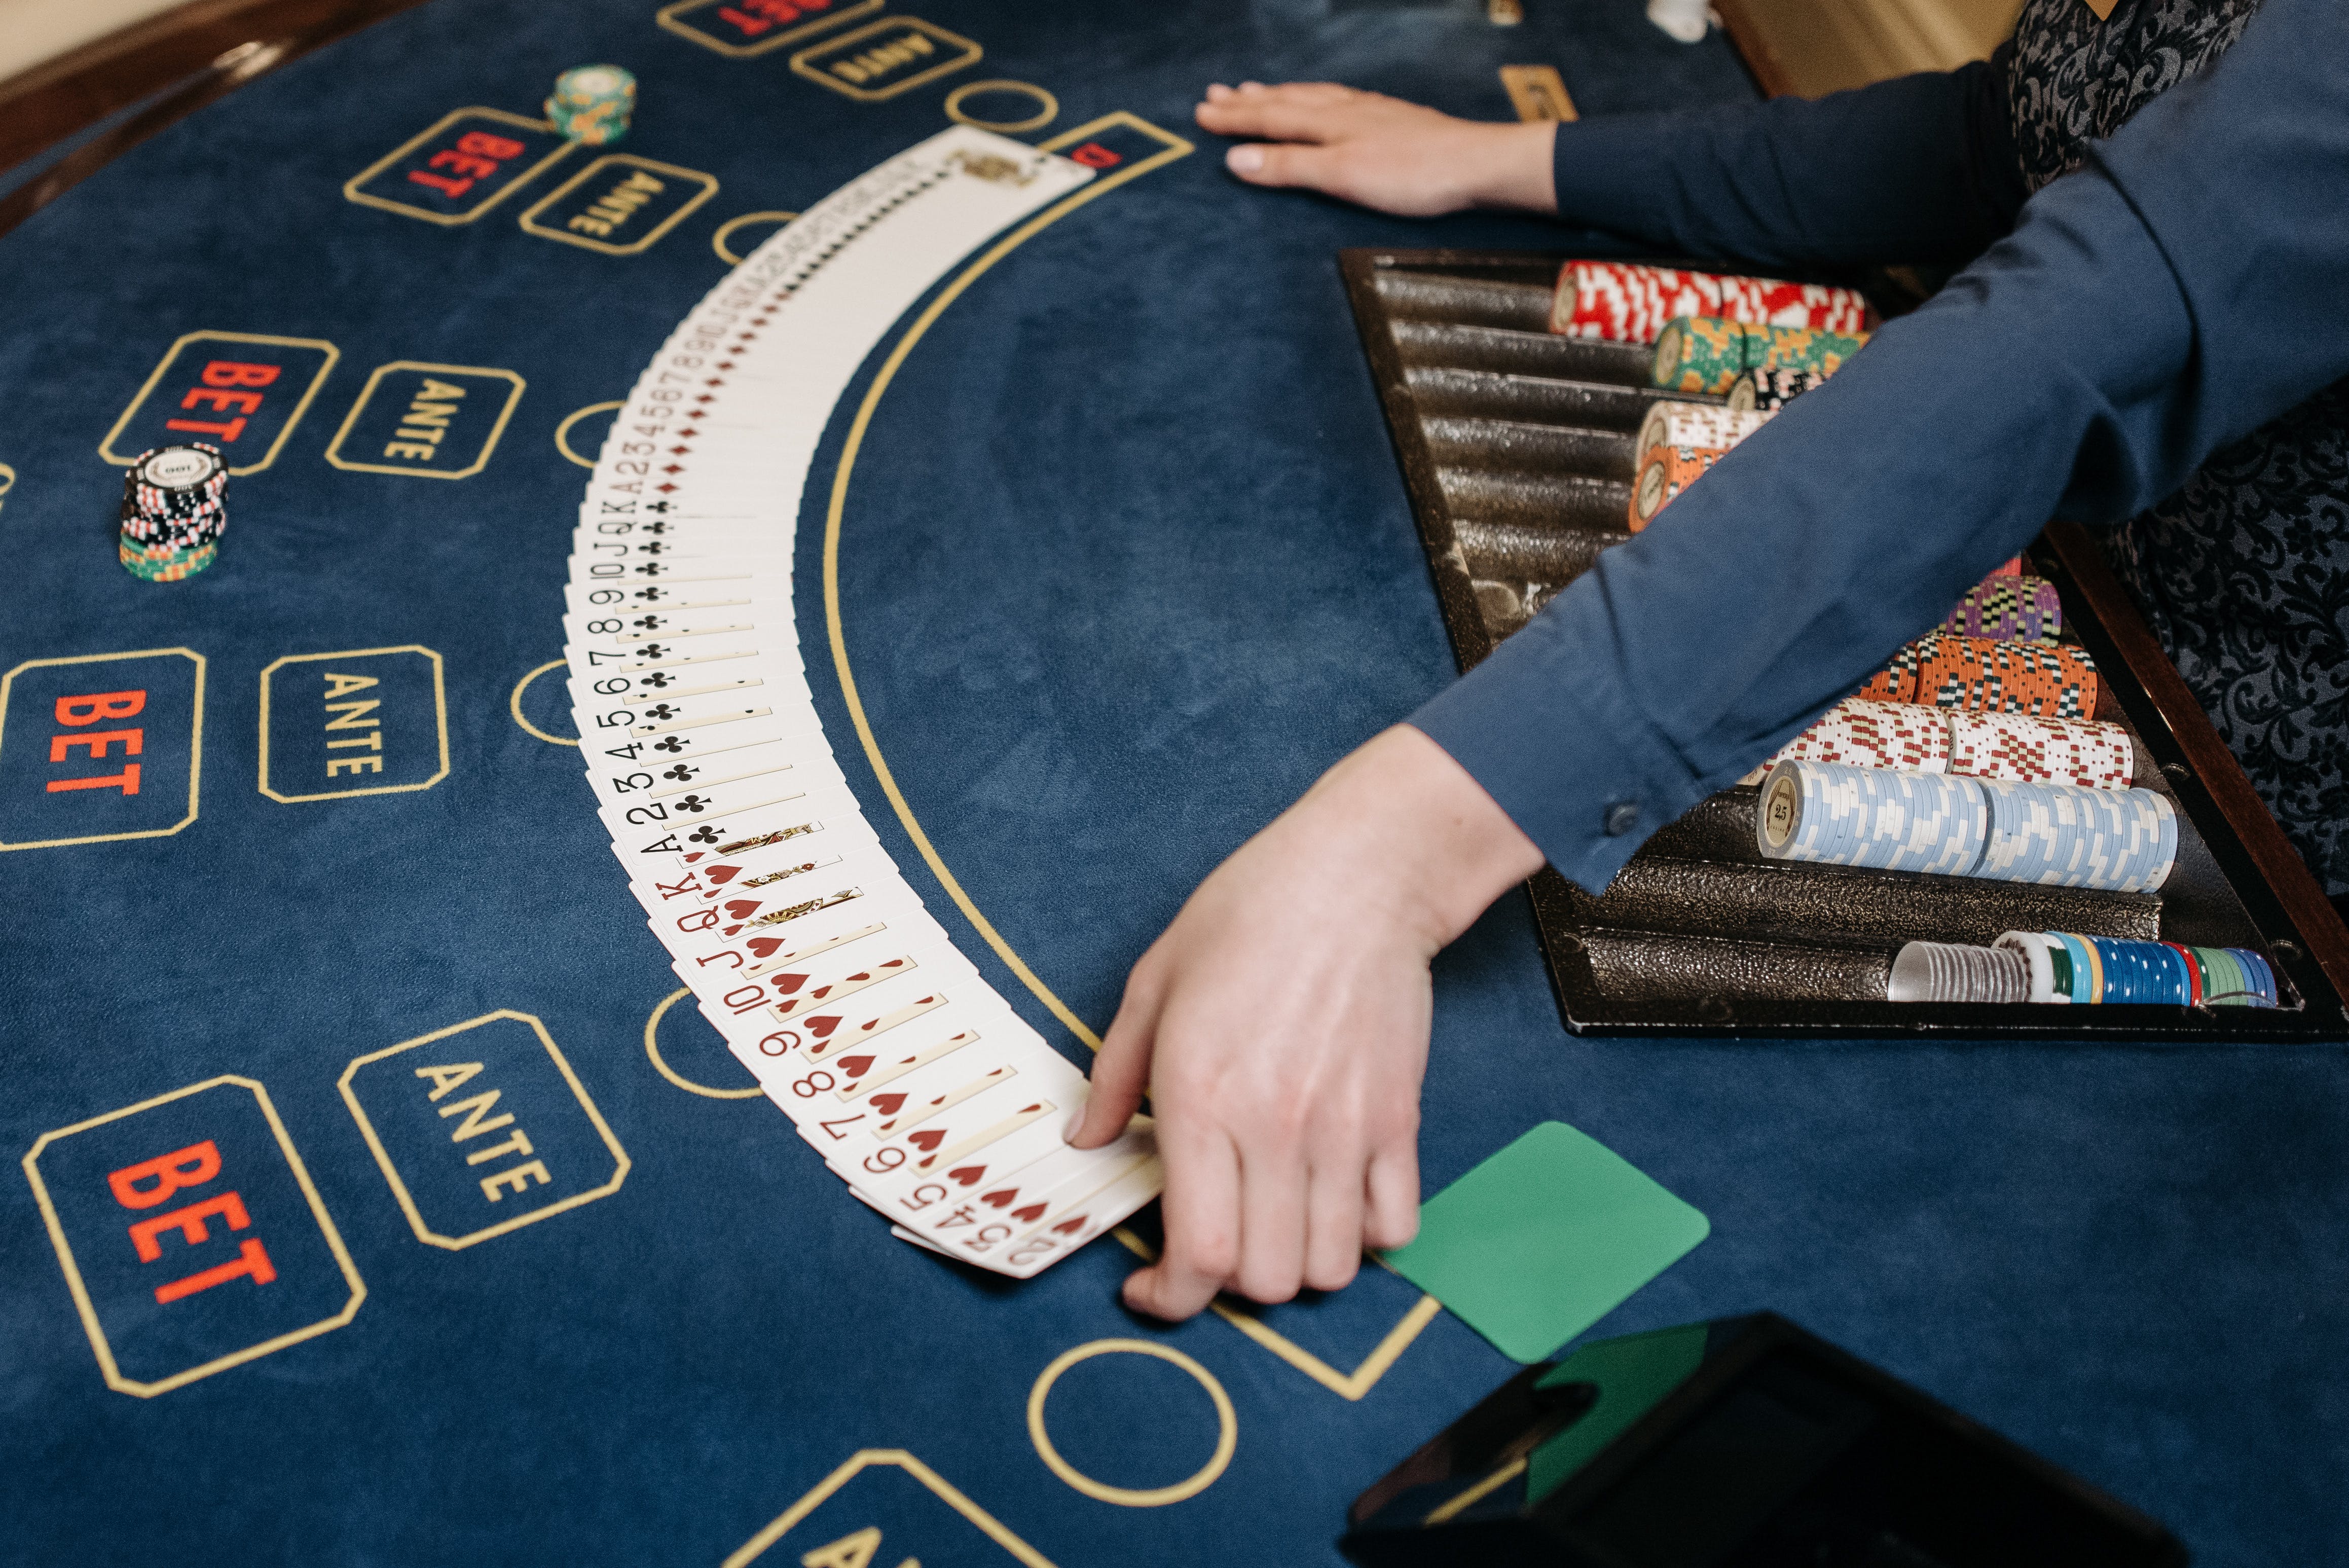 The virtual casino experience has come a long way. Gone are the days when players were limited to playing against computer algorithms and software-driven dealers (thank goodness).